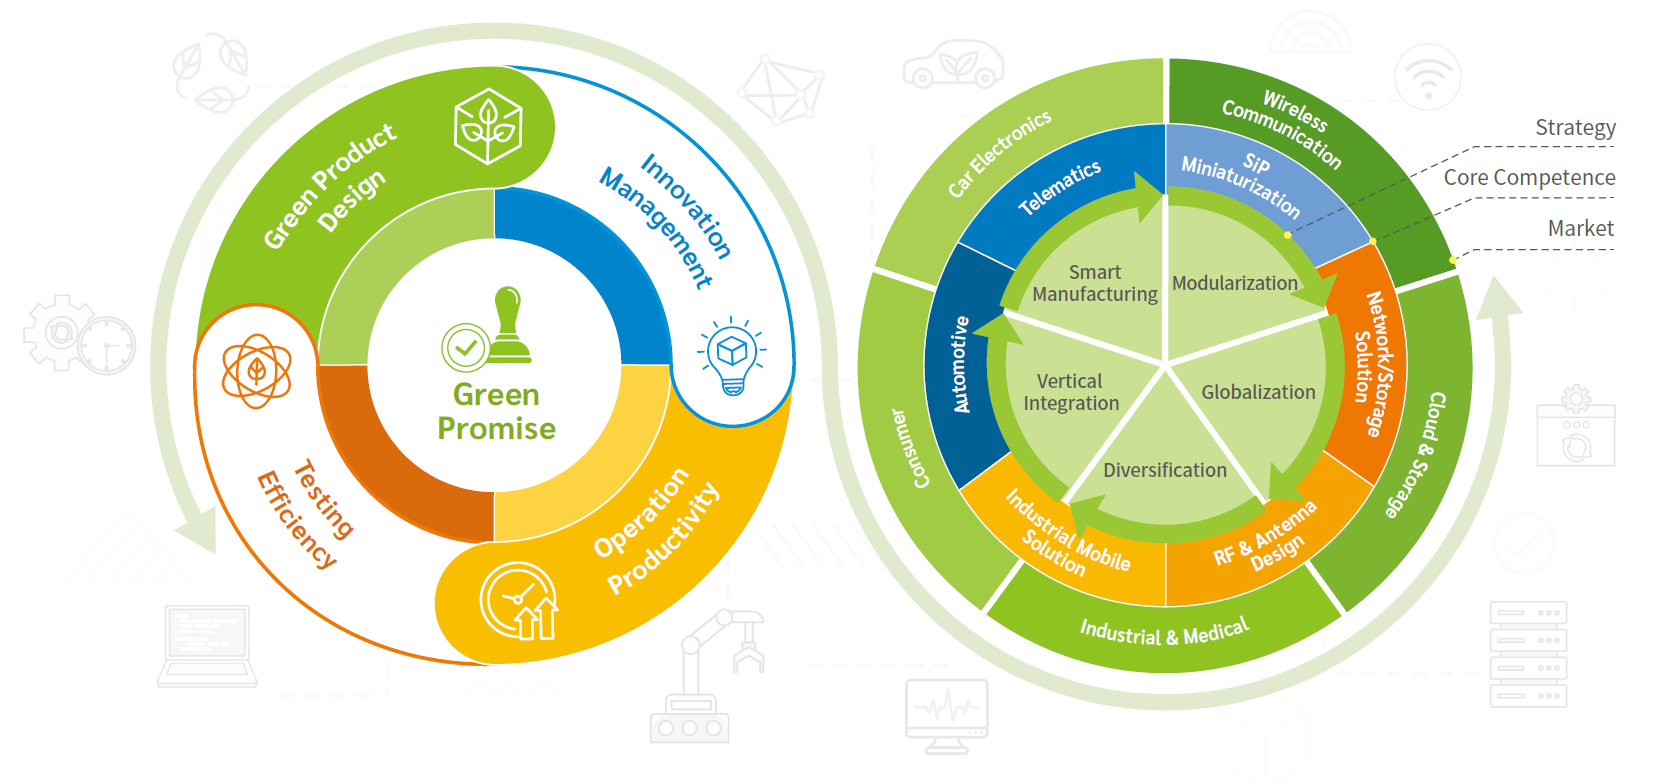 Green Product (Clean Technology) Strategy & Promise